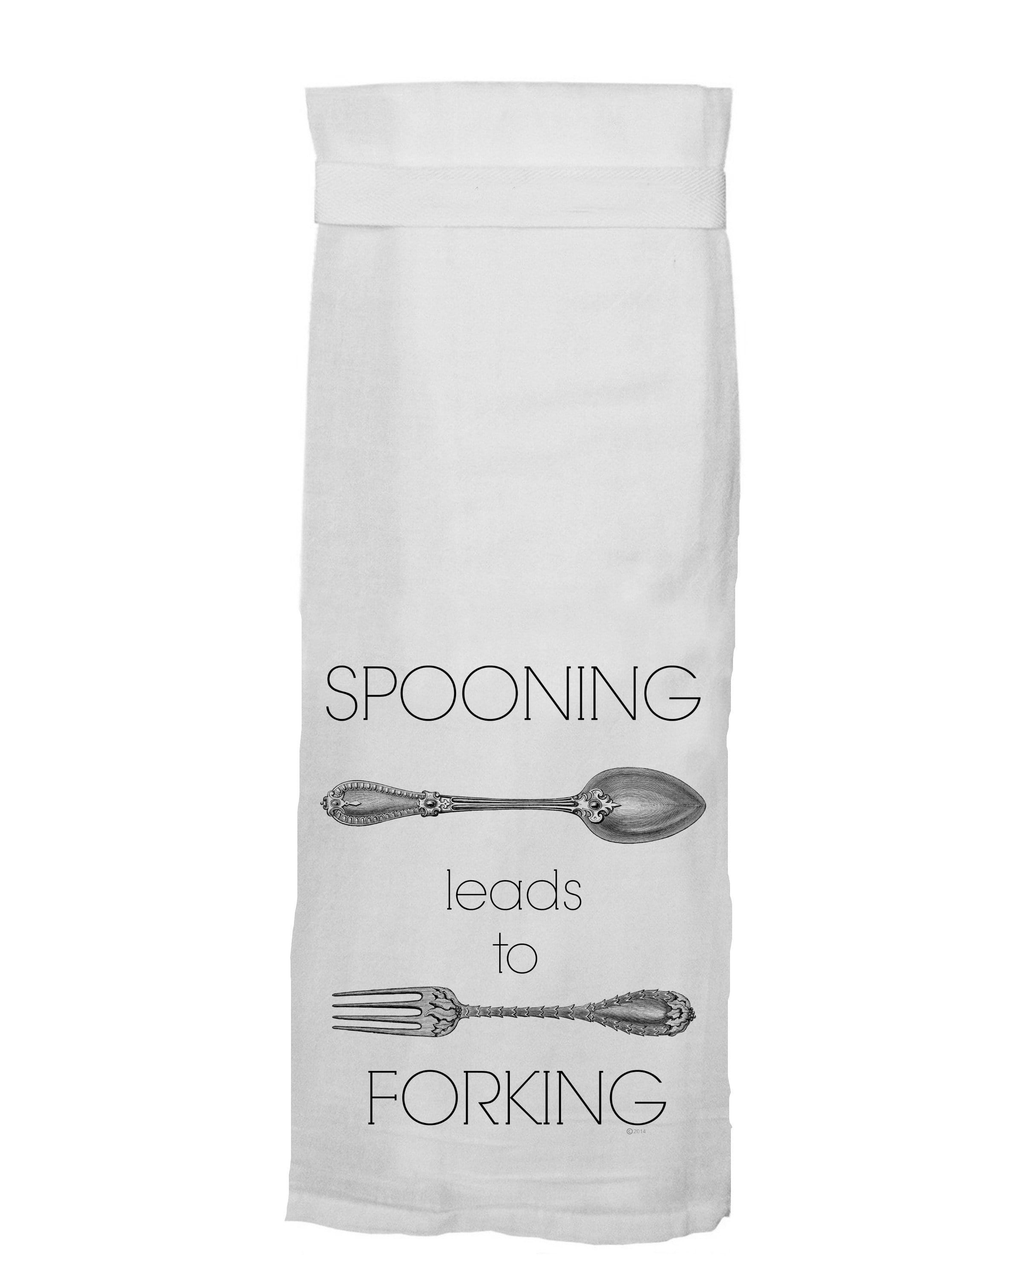 Spooning Leads To Forking Tea Towel